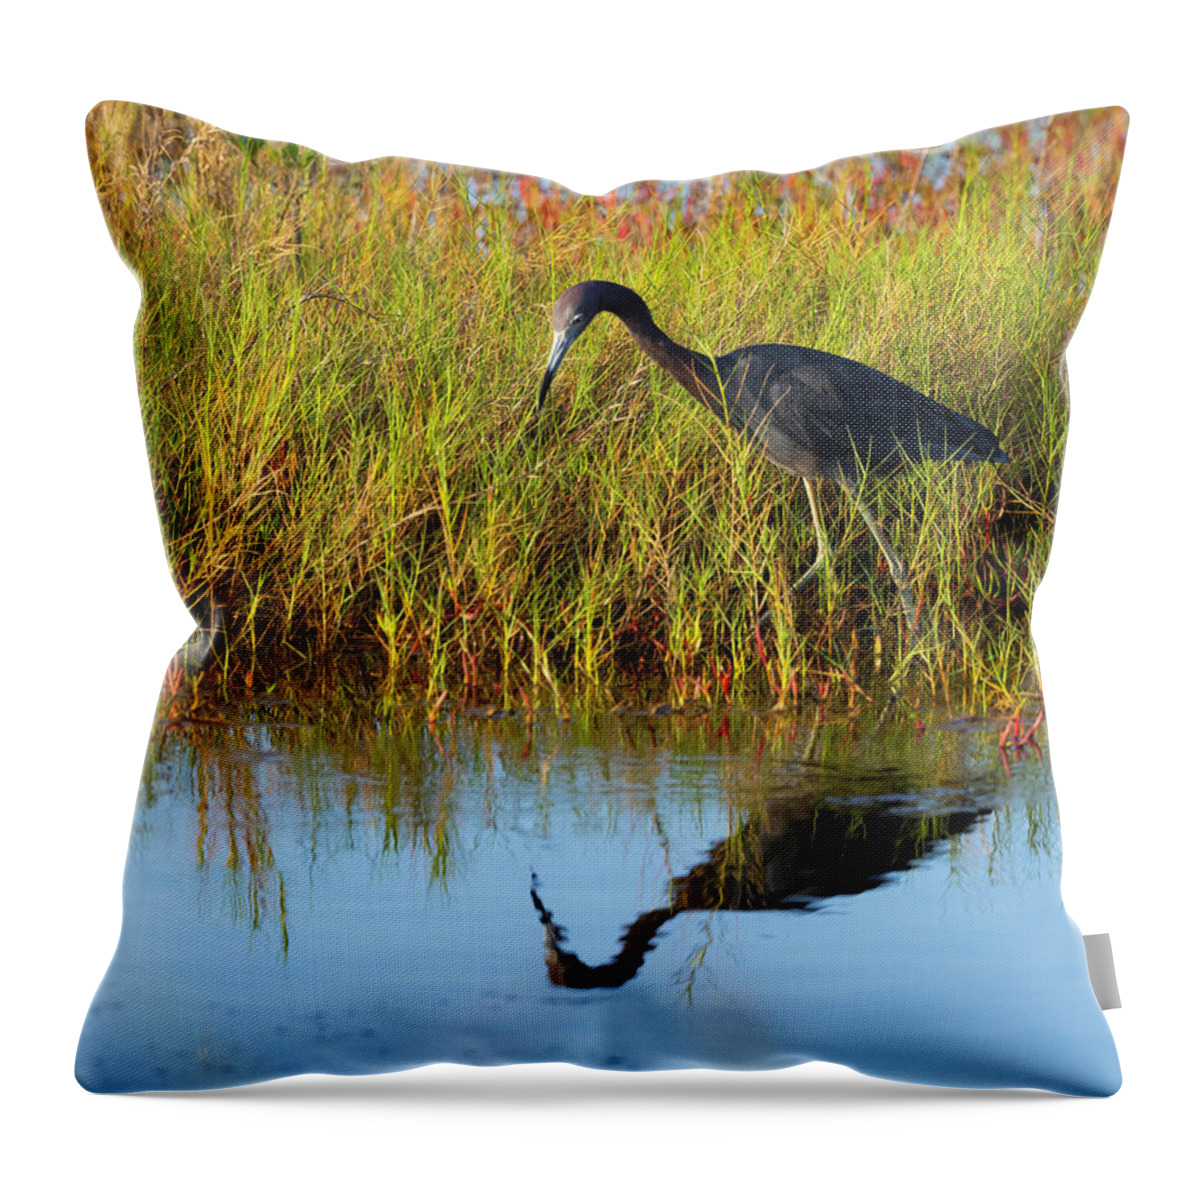 R5-2614 Throw Pillow featuring the photograph Reflecting on Life by Gordon Elwell